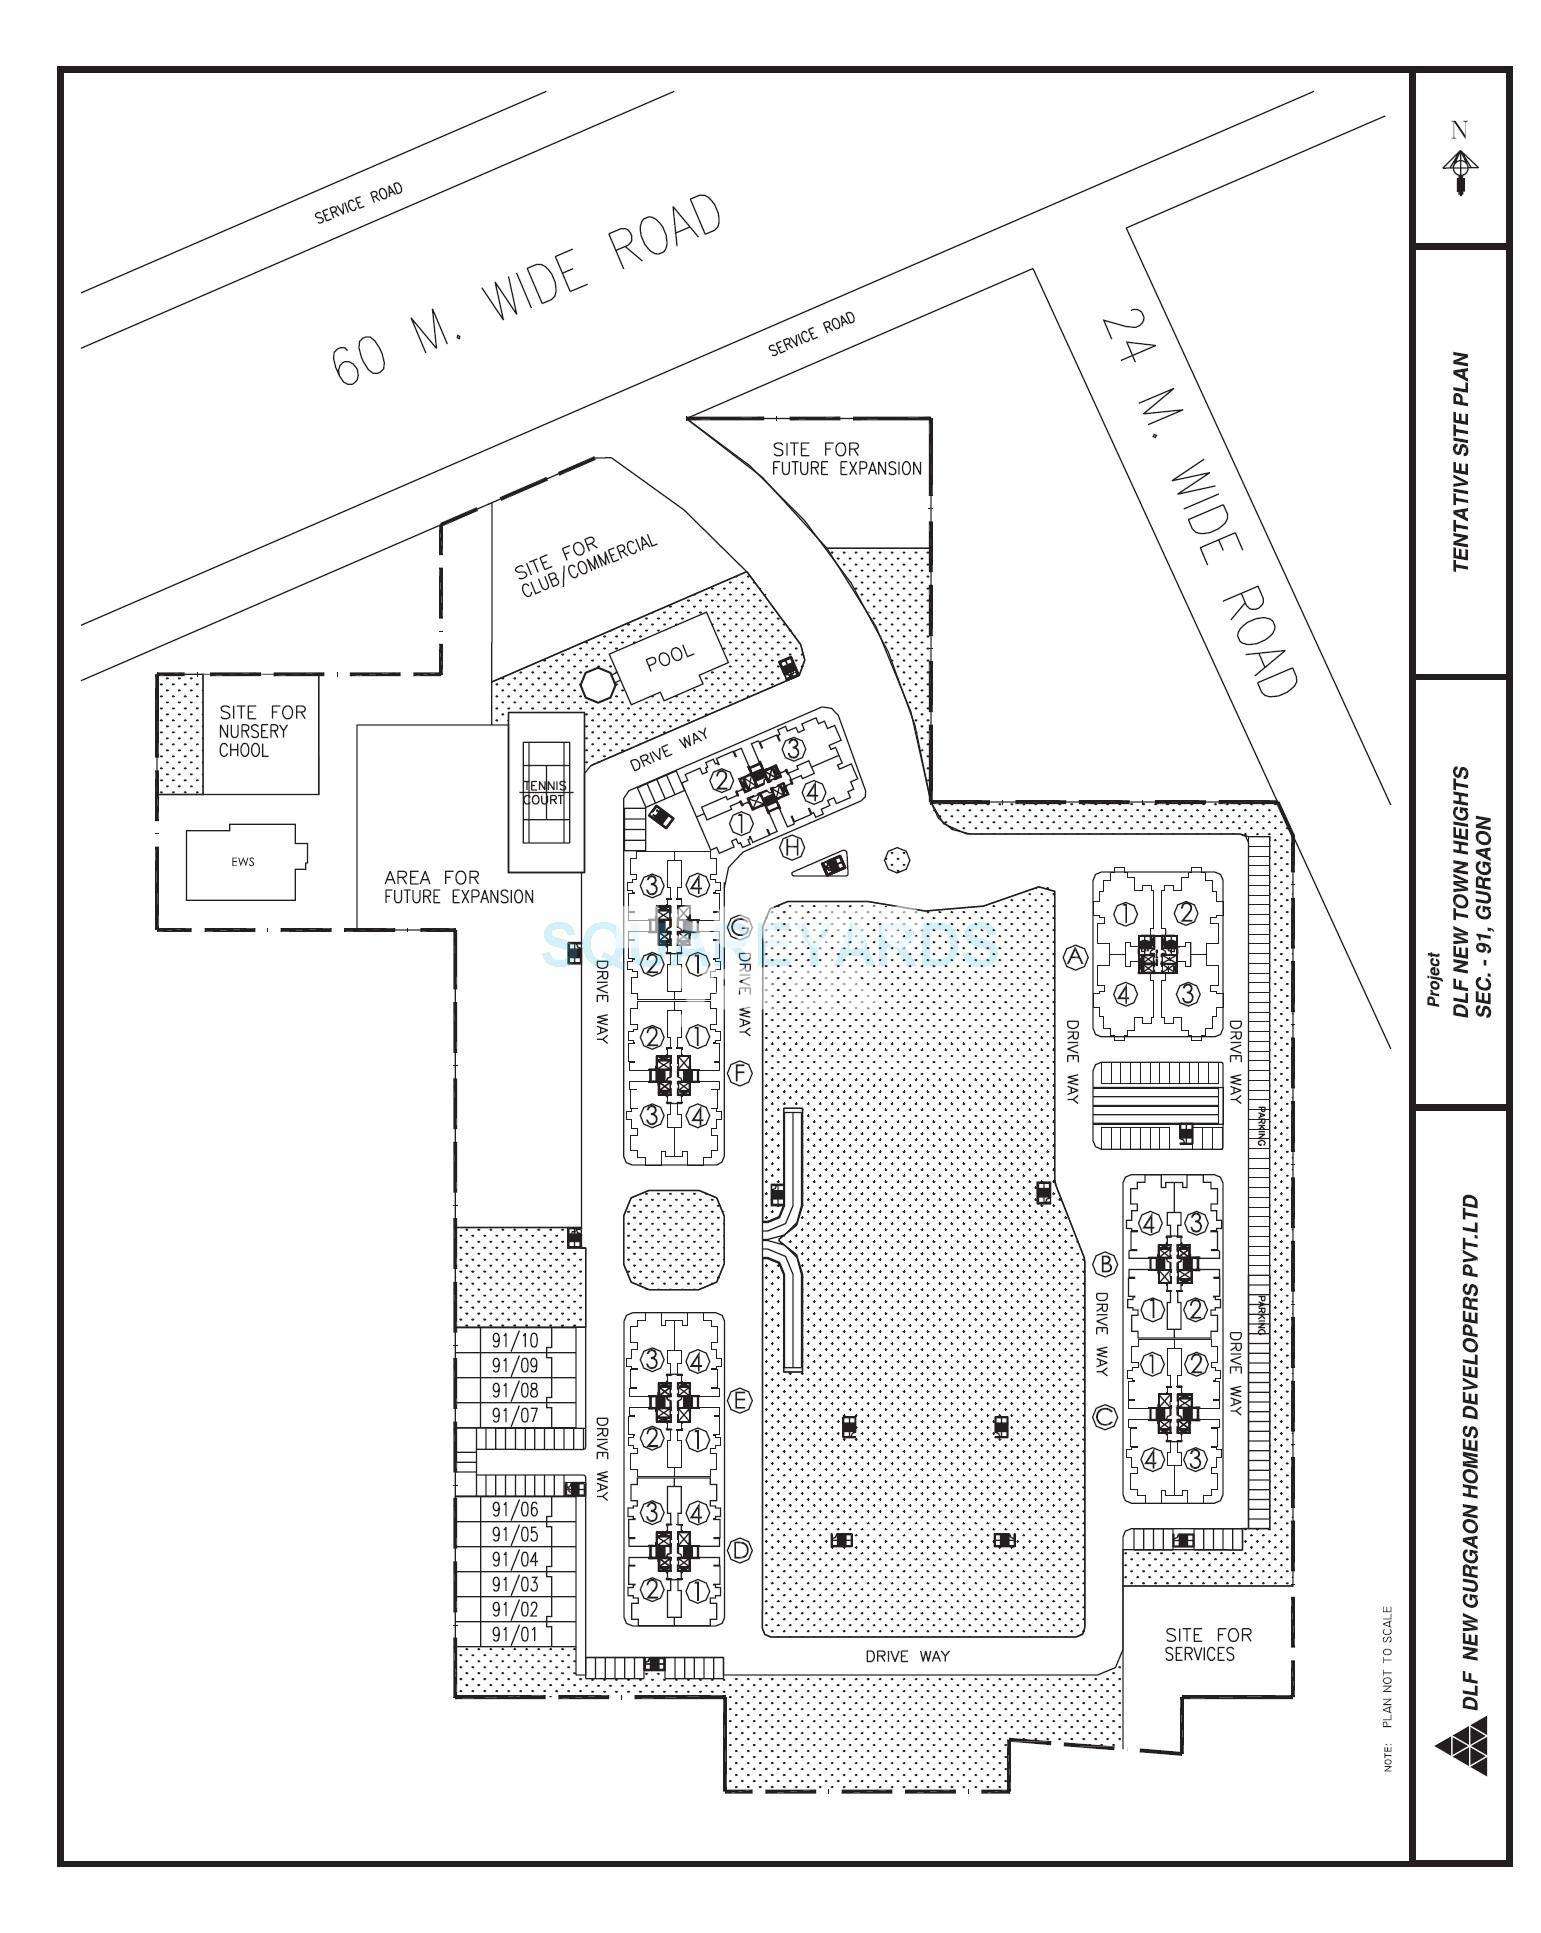 dlf new town heights iii master plan image1